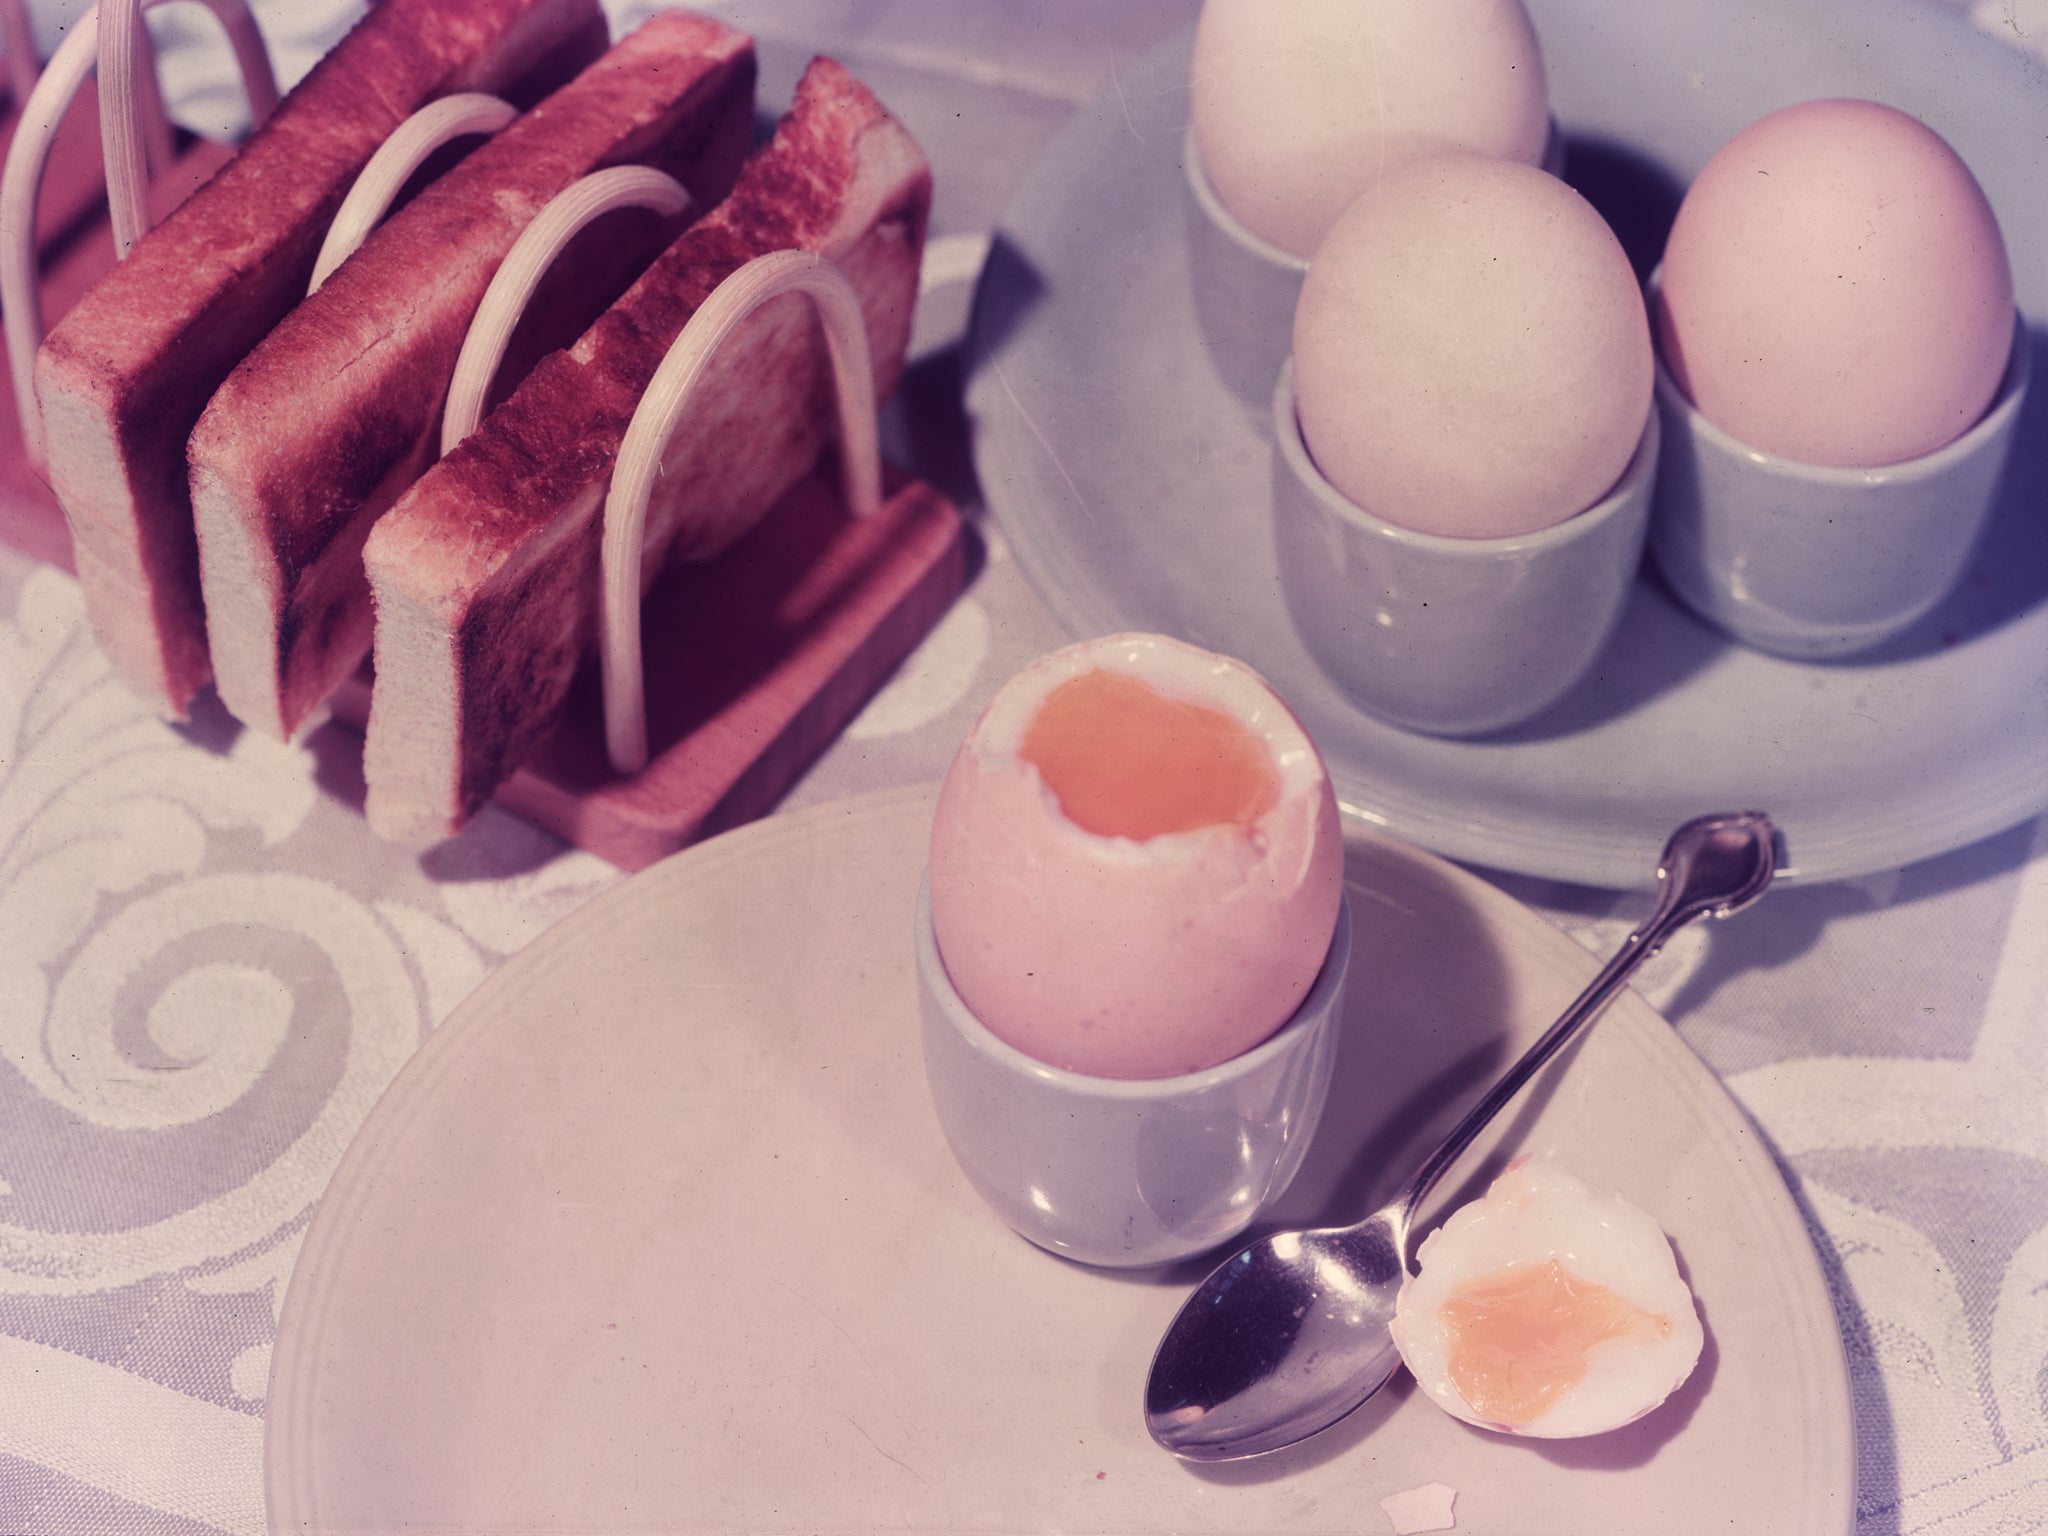 circa 1955: The first meal of the day, boiled eggs and buttered toast for breakfast